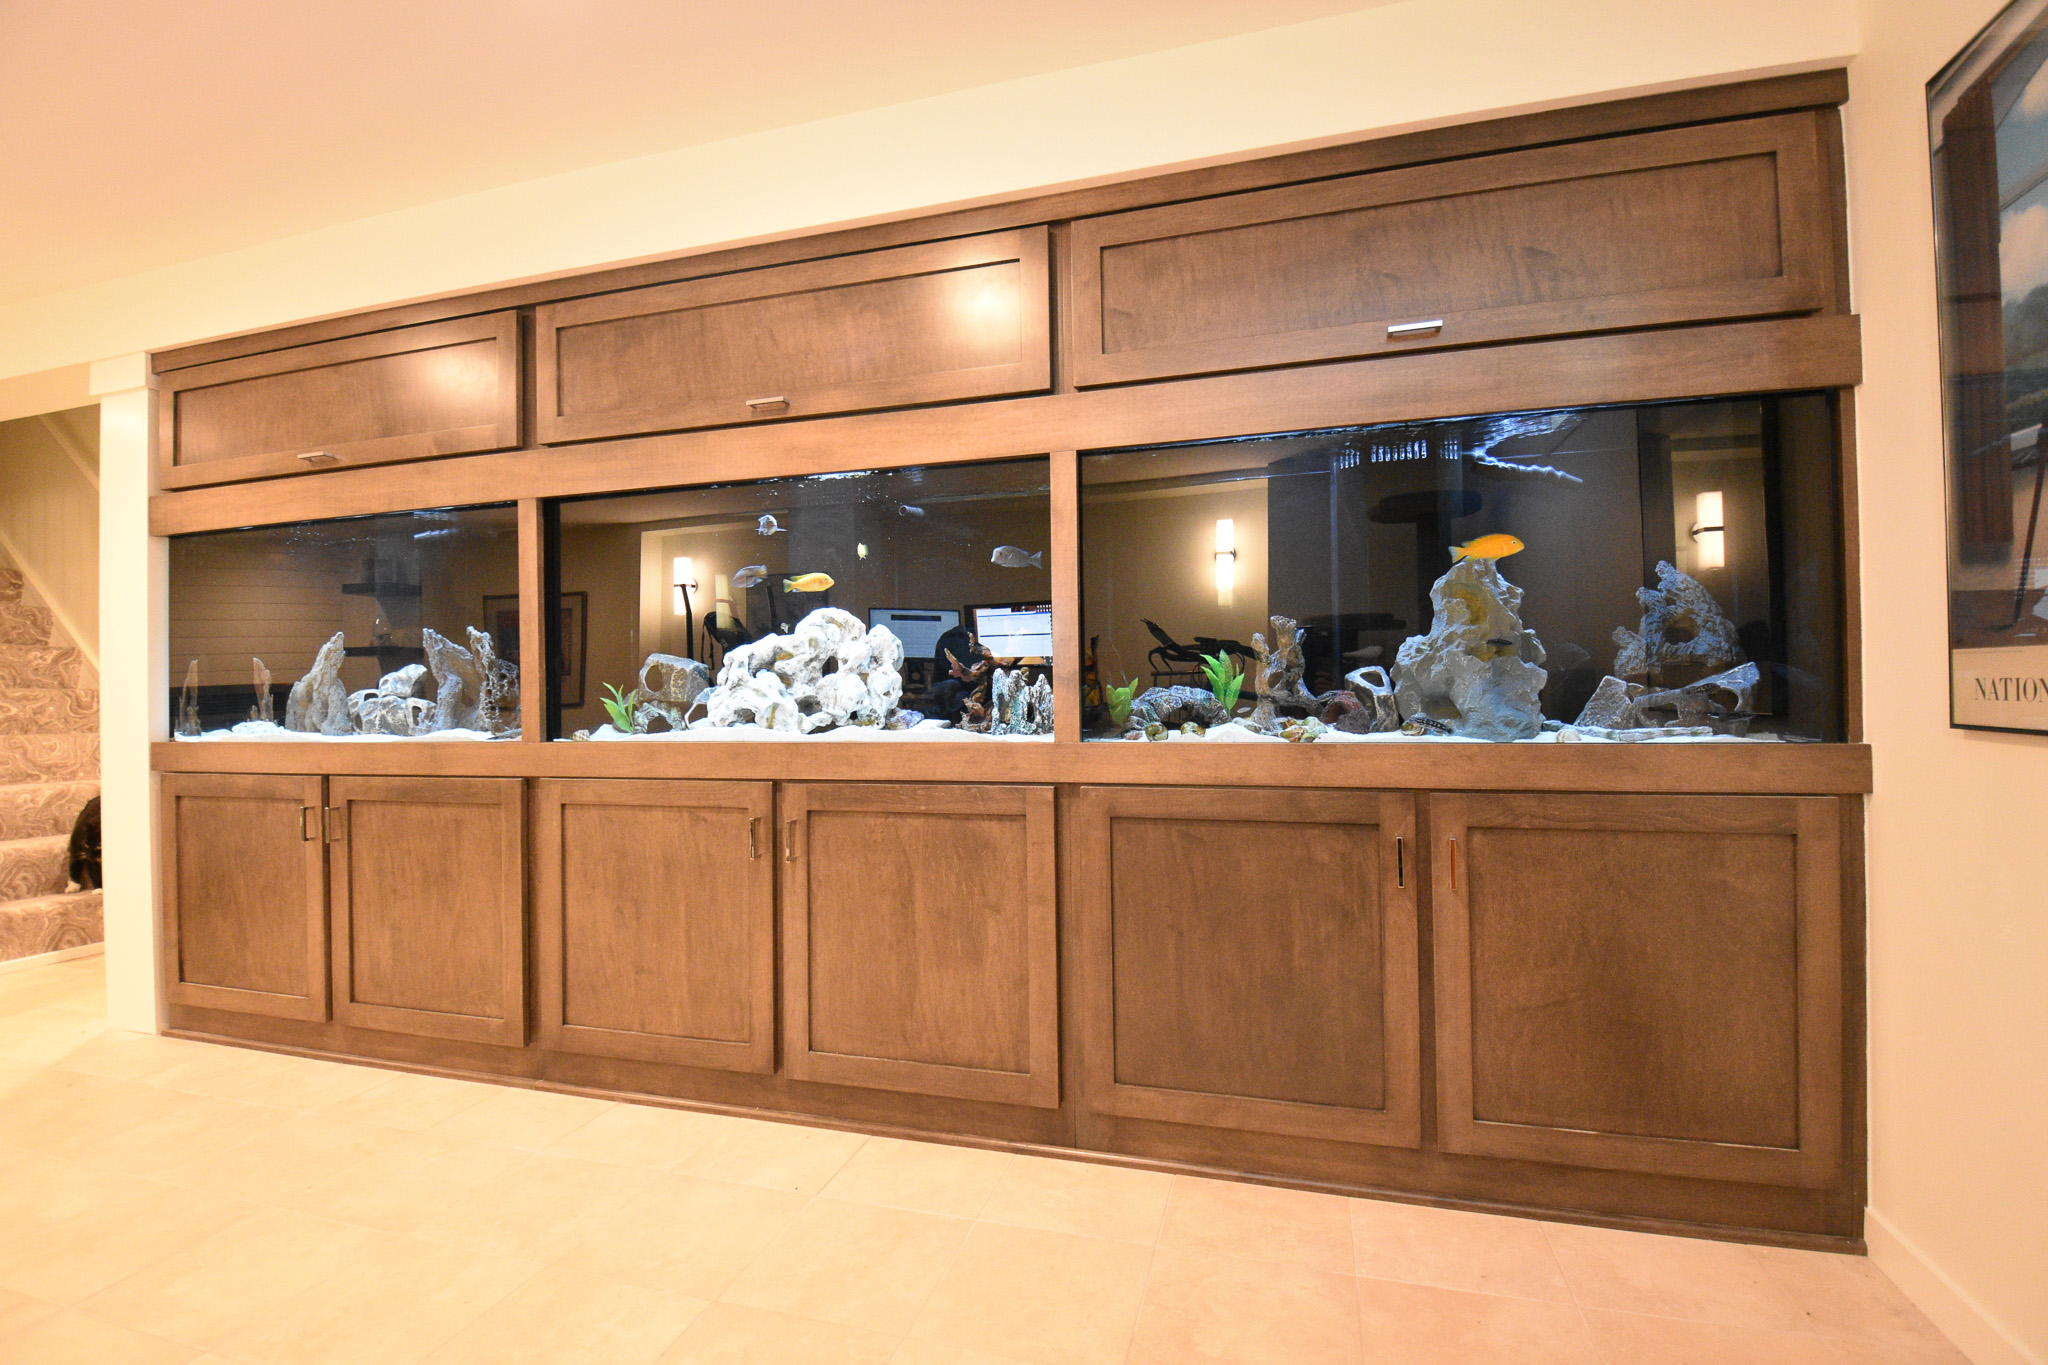 Fishtank build into cabinetry in basement remodel